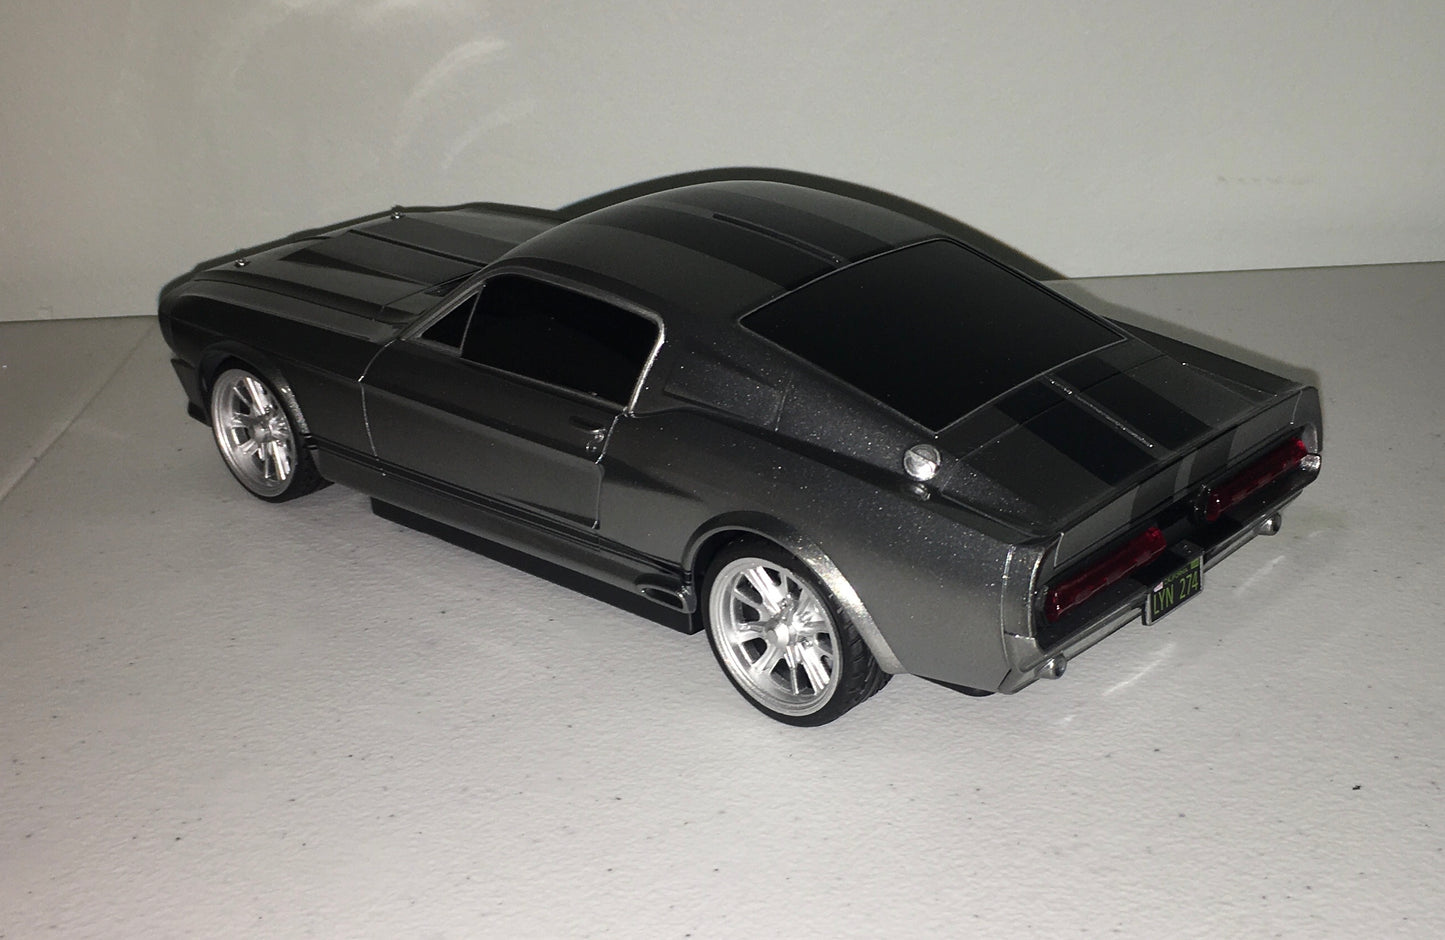 Greenlight 1:18 R/C Gone in 60 Seconds Eleanor 1967 Shelby GT500 Mustang